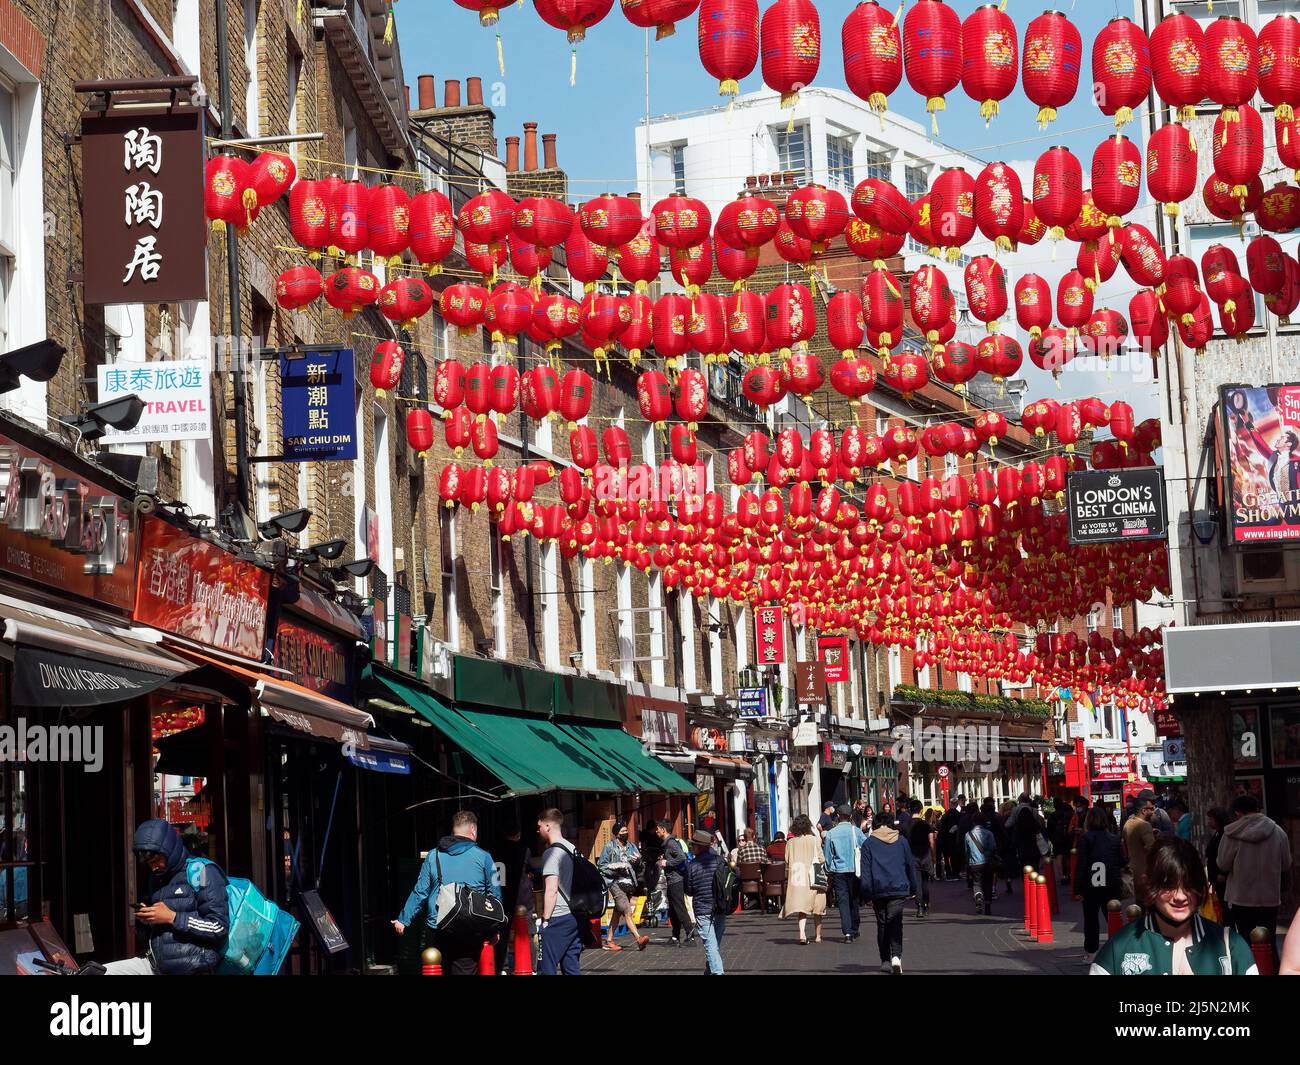 A view along LisleStreet in London's Chinatown decorated with hanging red lanterns Stock Photo